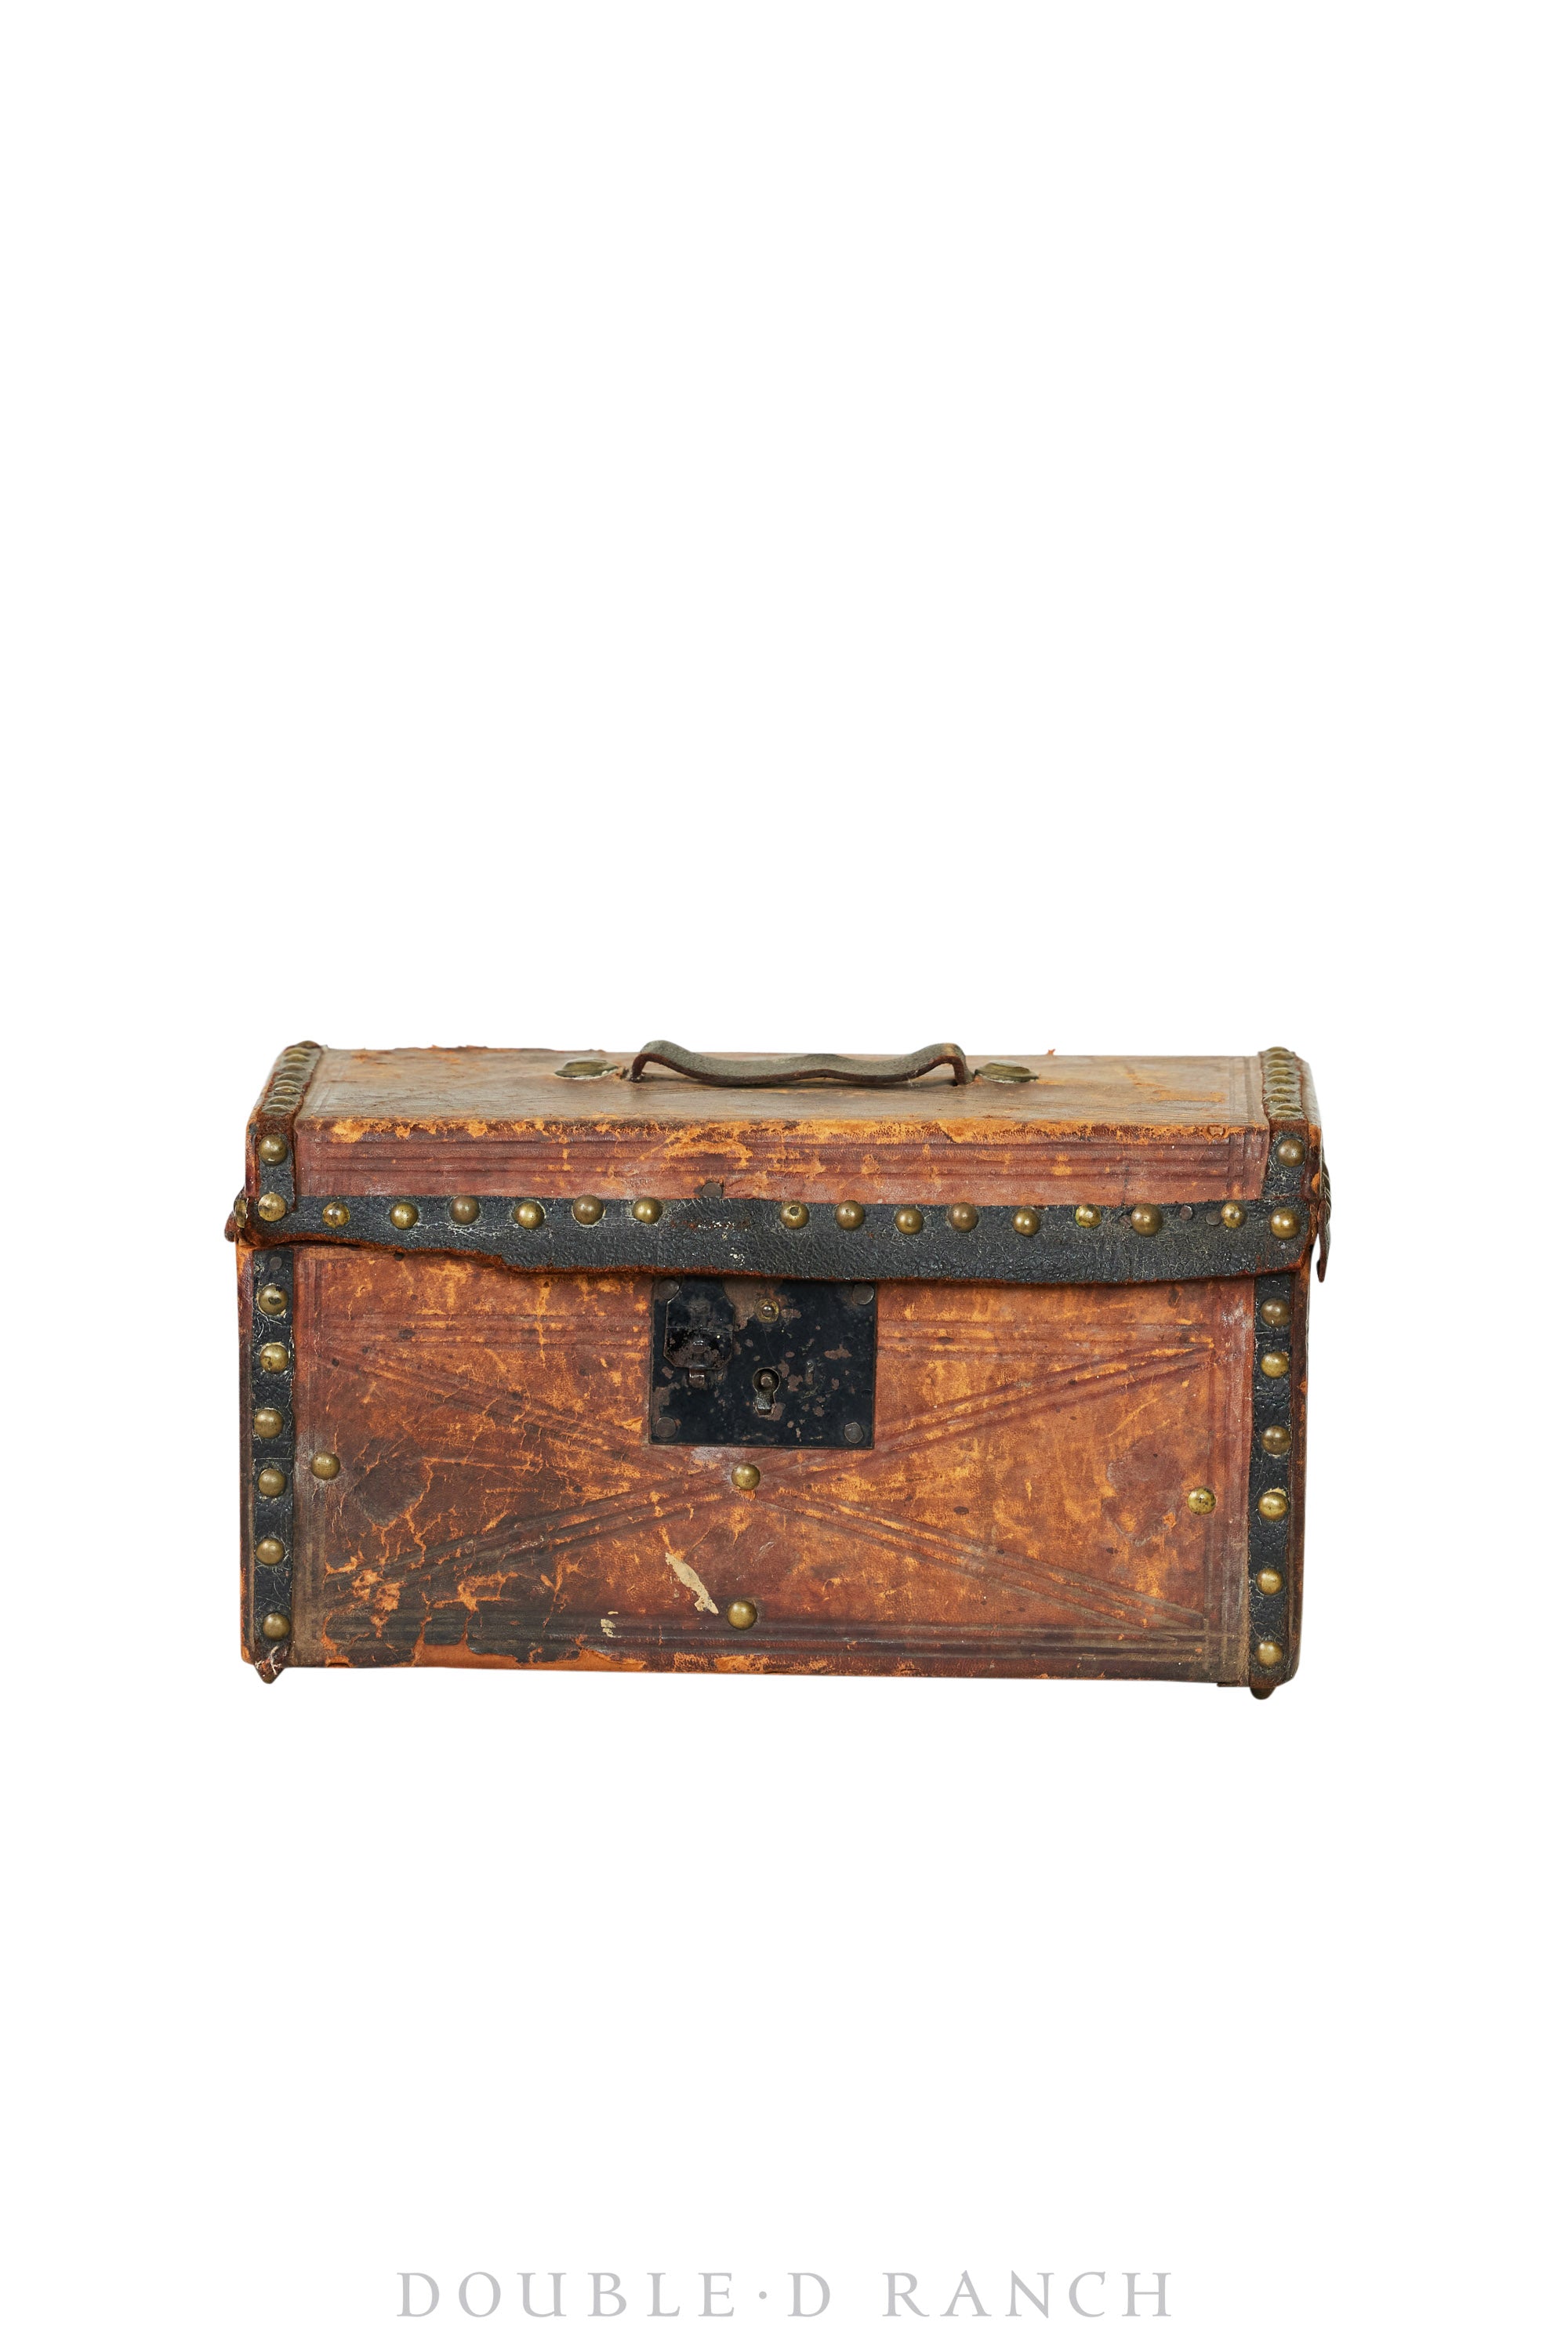 Home, Furniture, Trunk, Document, Hide Covered, Studded, Vintage 19th Century, 238